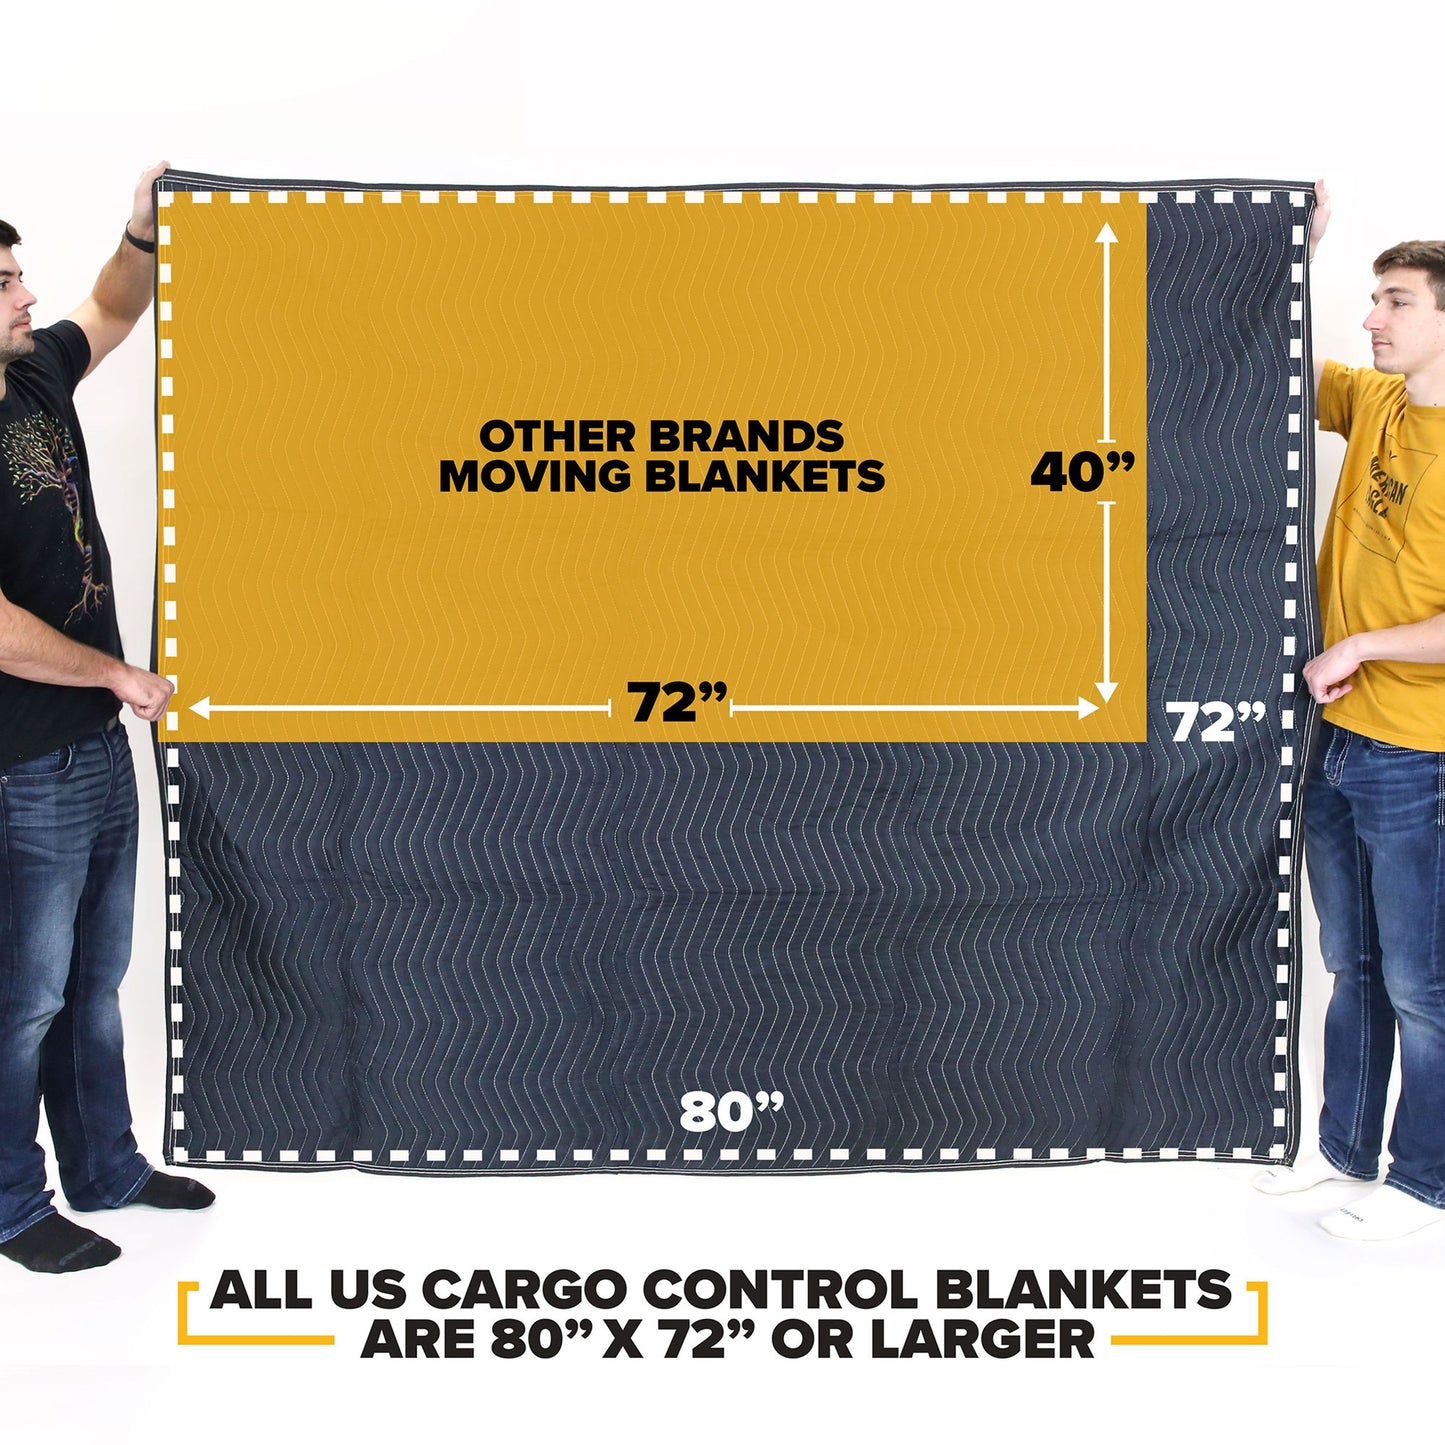 Moving Blankets- Econo Saver 4-Pack image 4 of 11